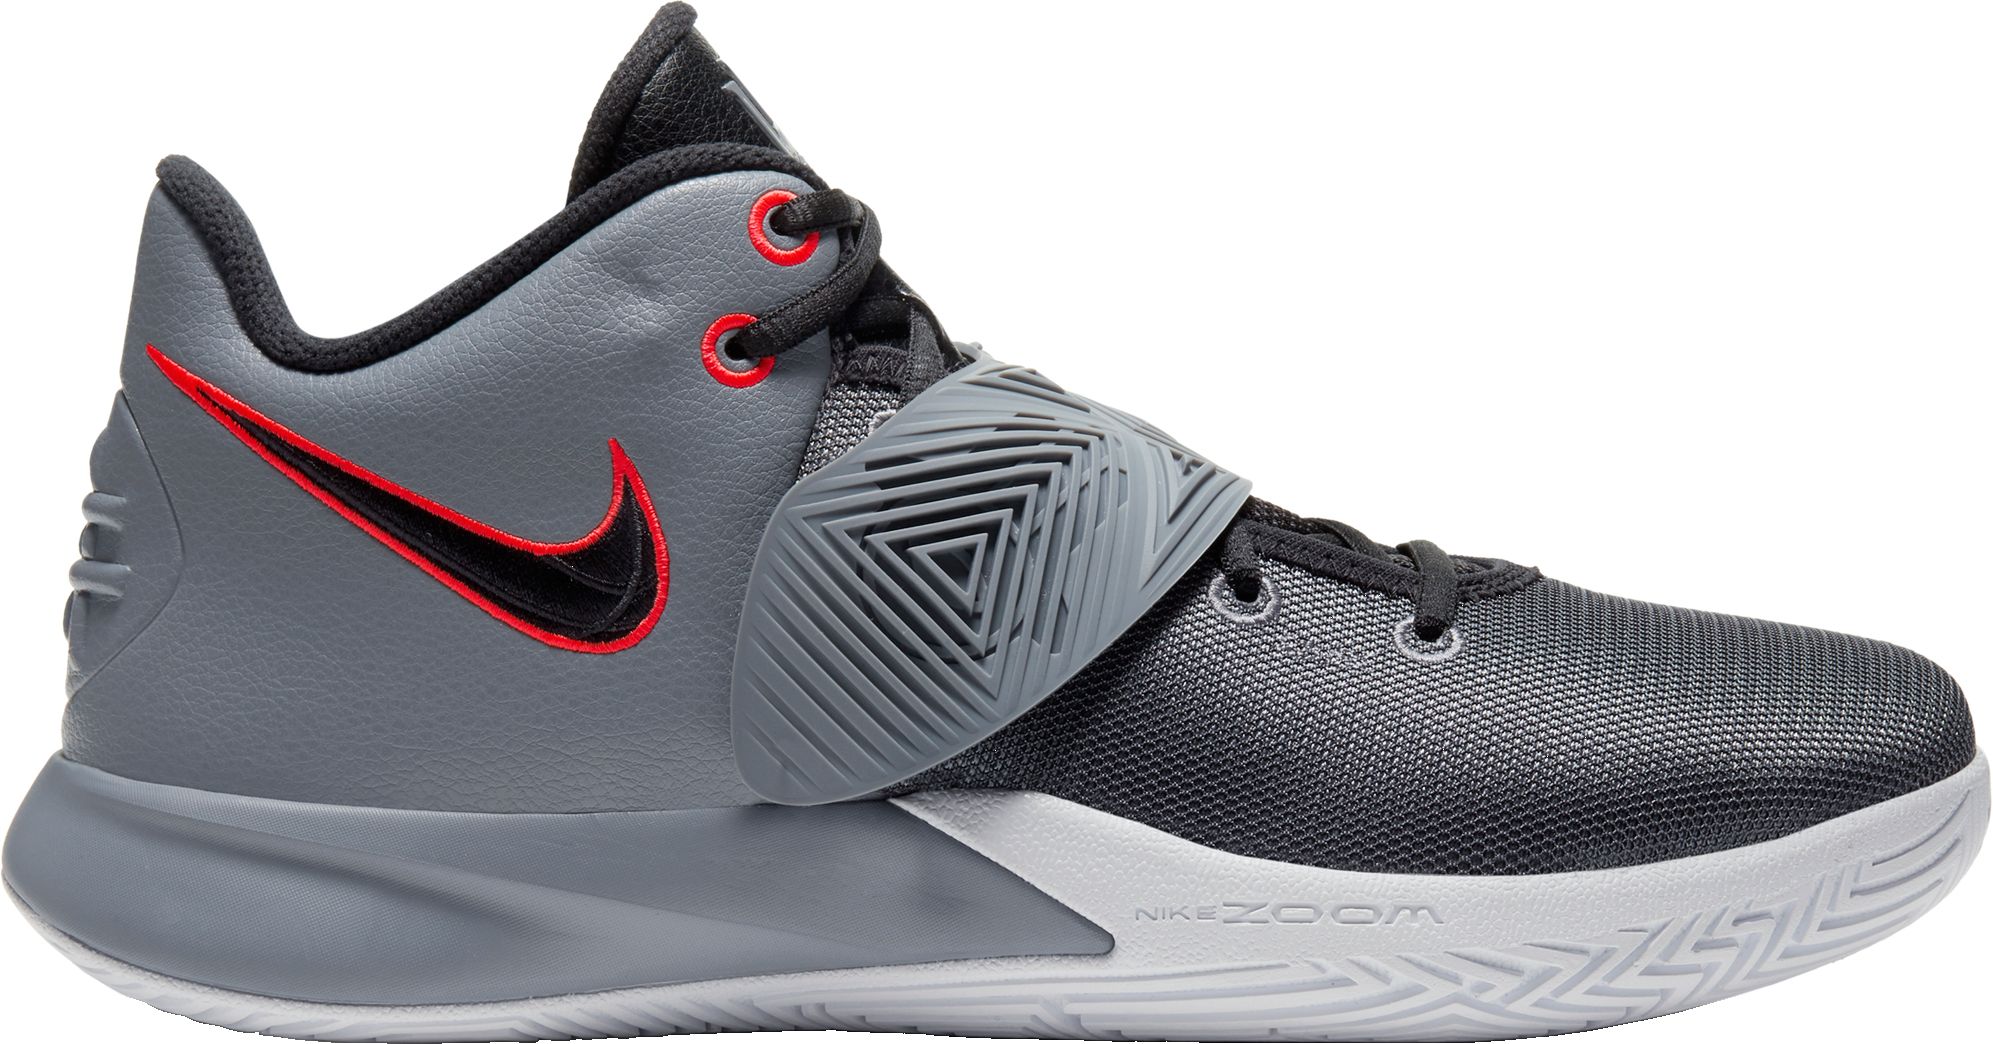 kyrie irving shoes under $50